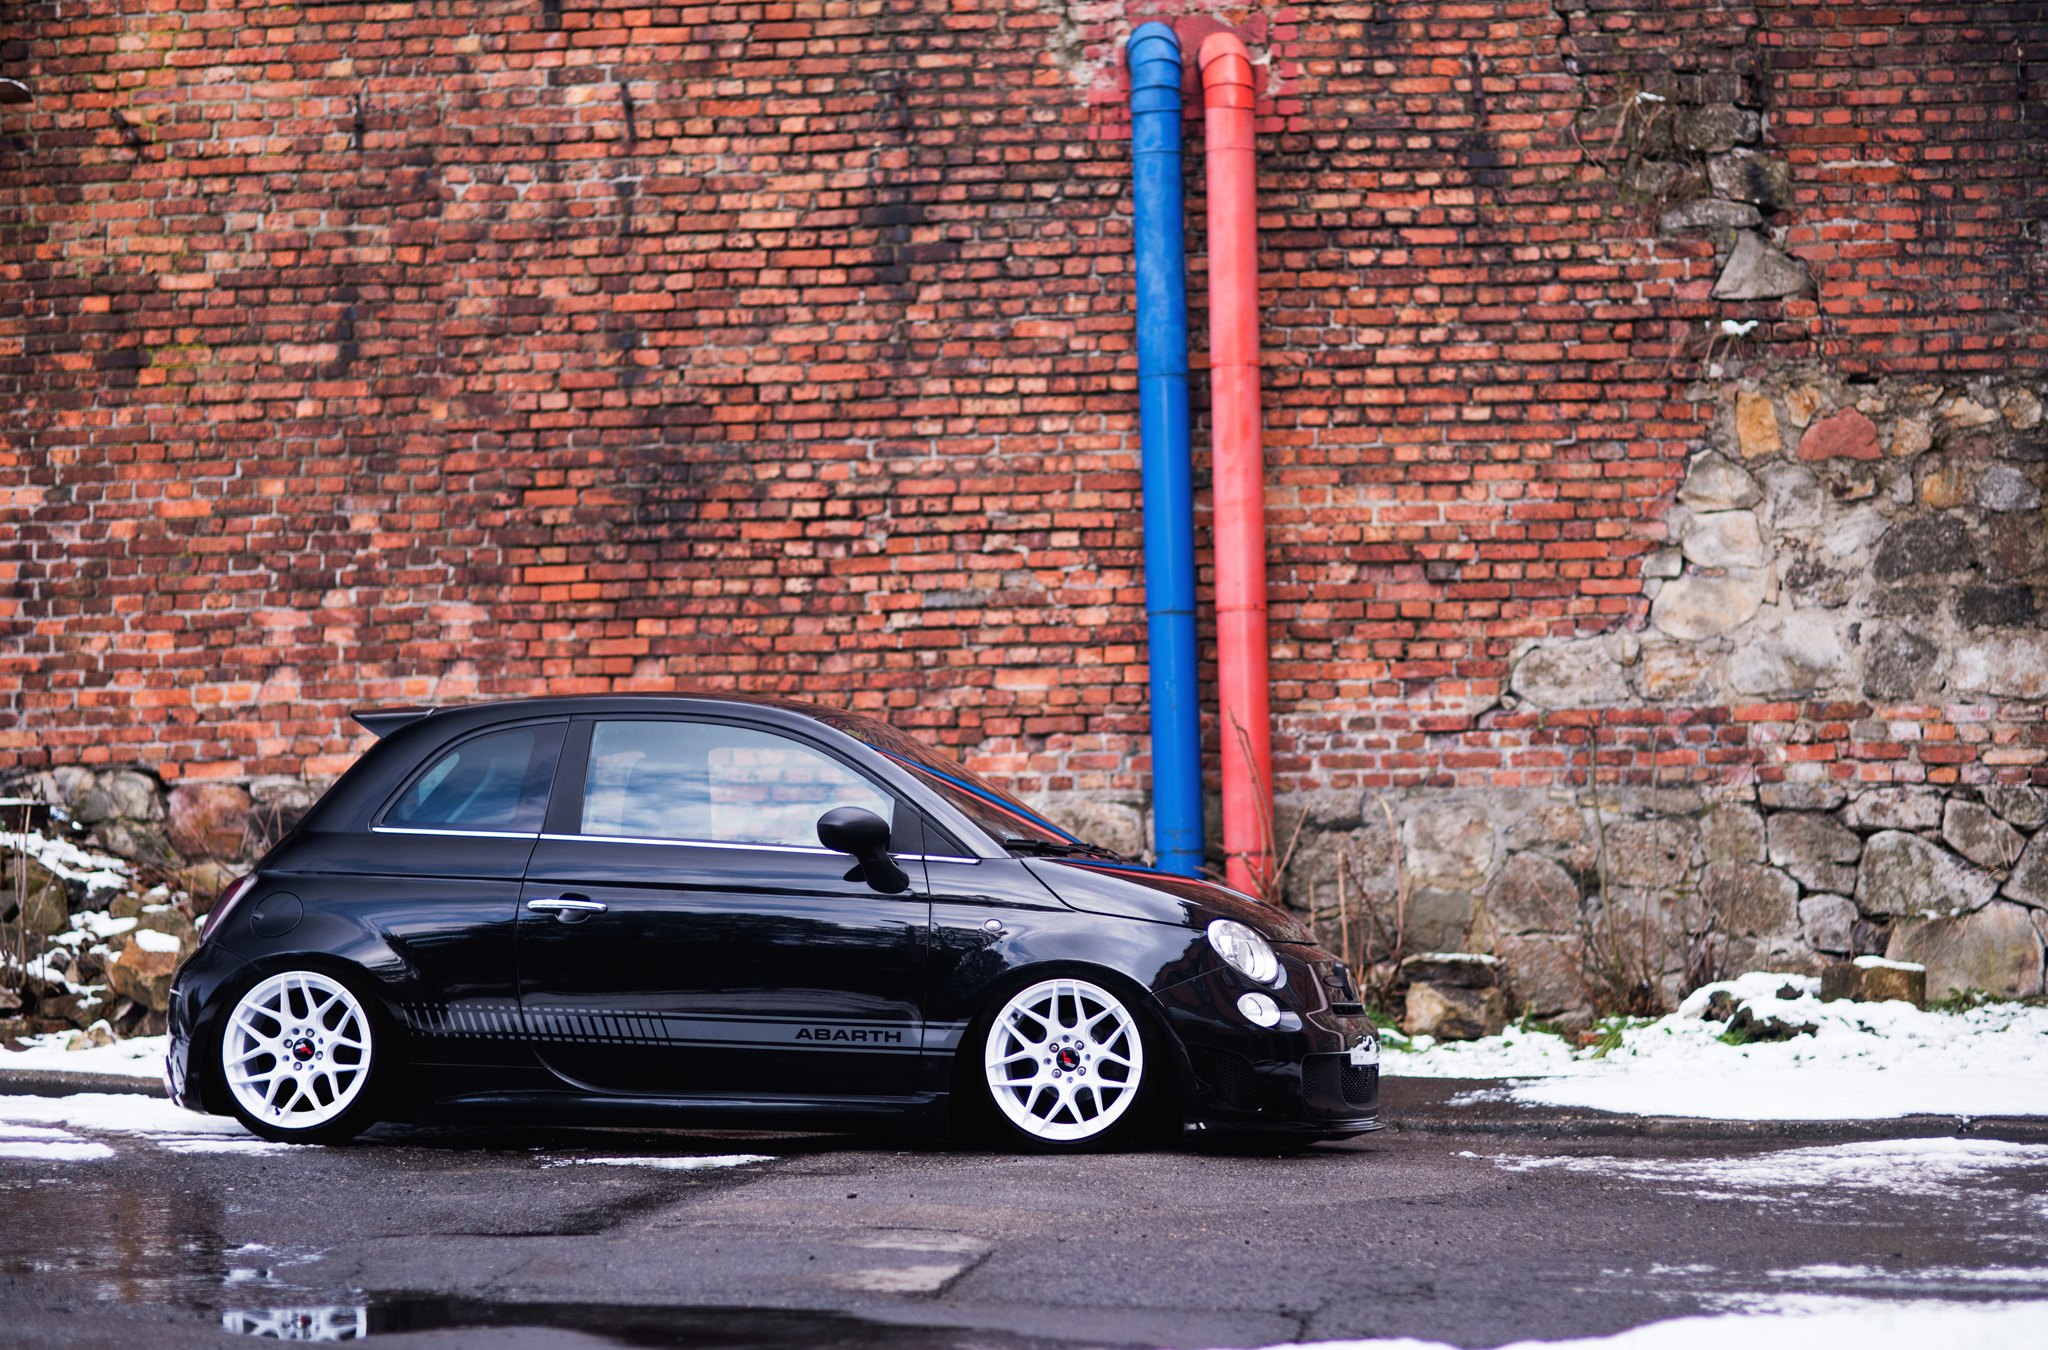 Aftermarket Side Skirts on Black Fiat 500 Abarth - Photo by JR Wheels